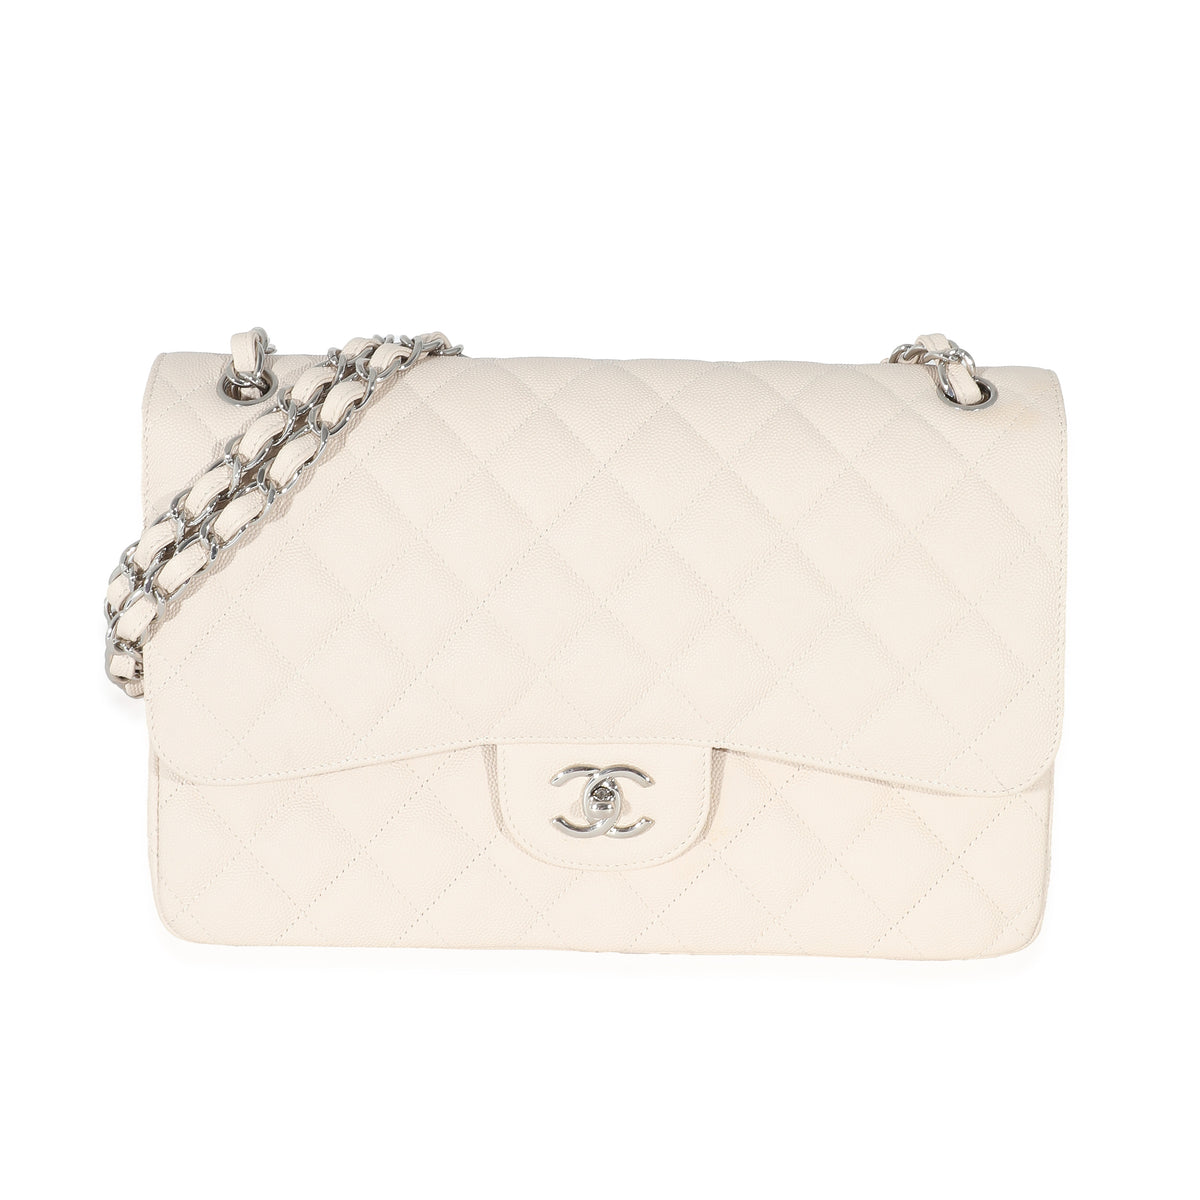 CHANEL Beige Quilted Caviar Leather Business Affinity Backpack